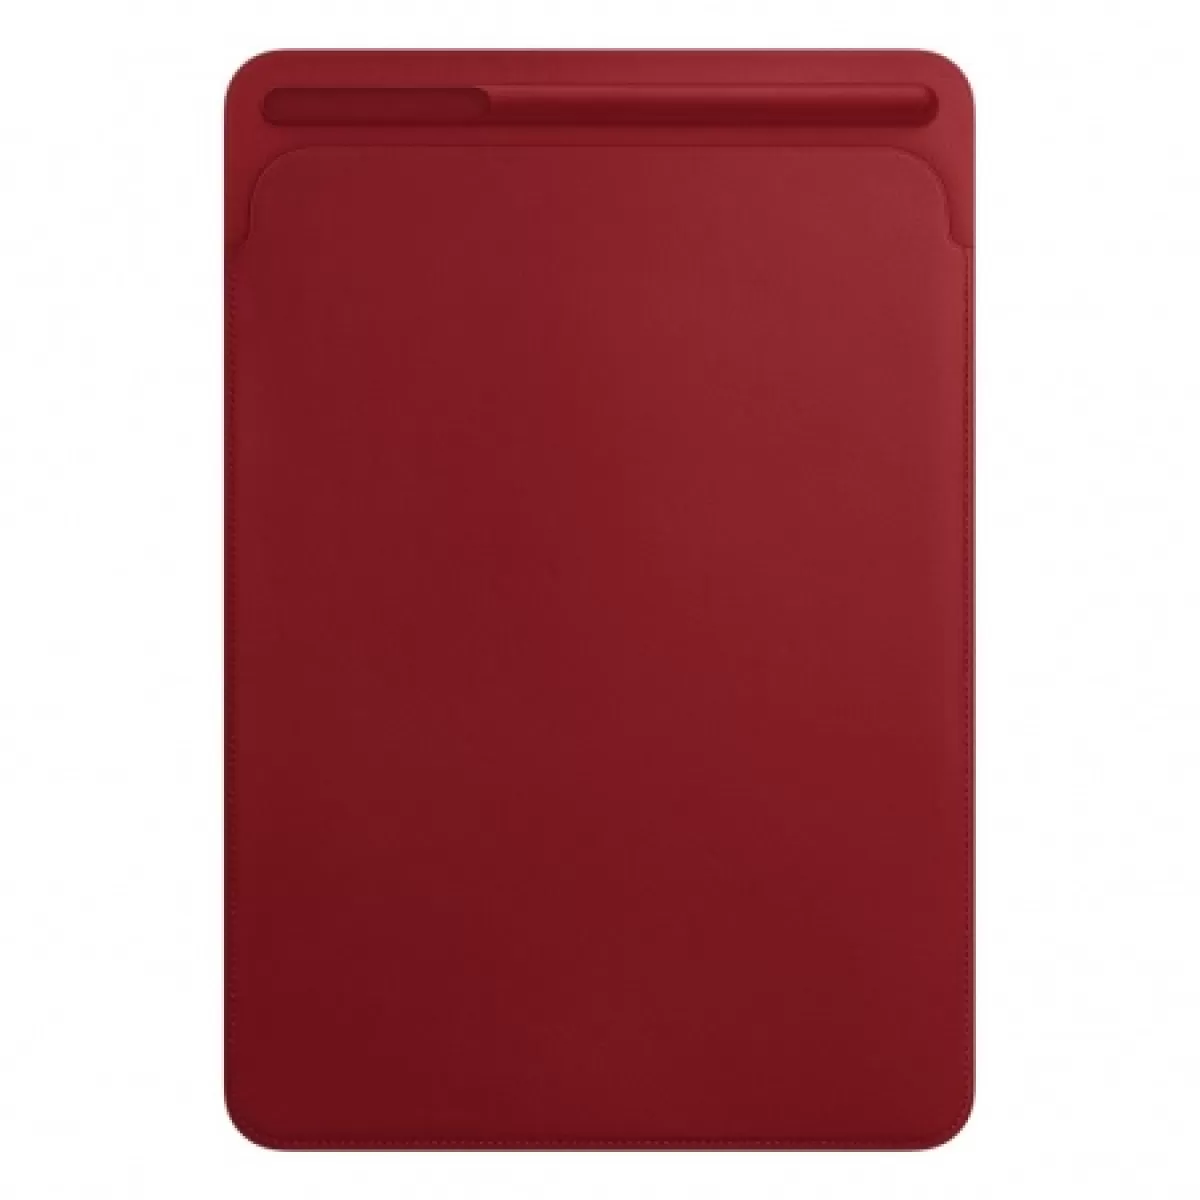 Apple Leather Sleeve for 10.5inch iPad Pro (PRODUCT) RED